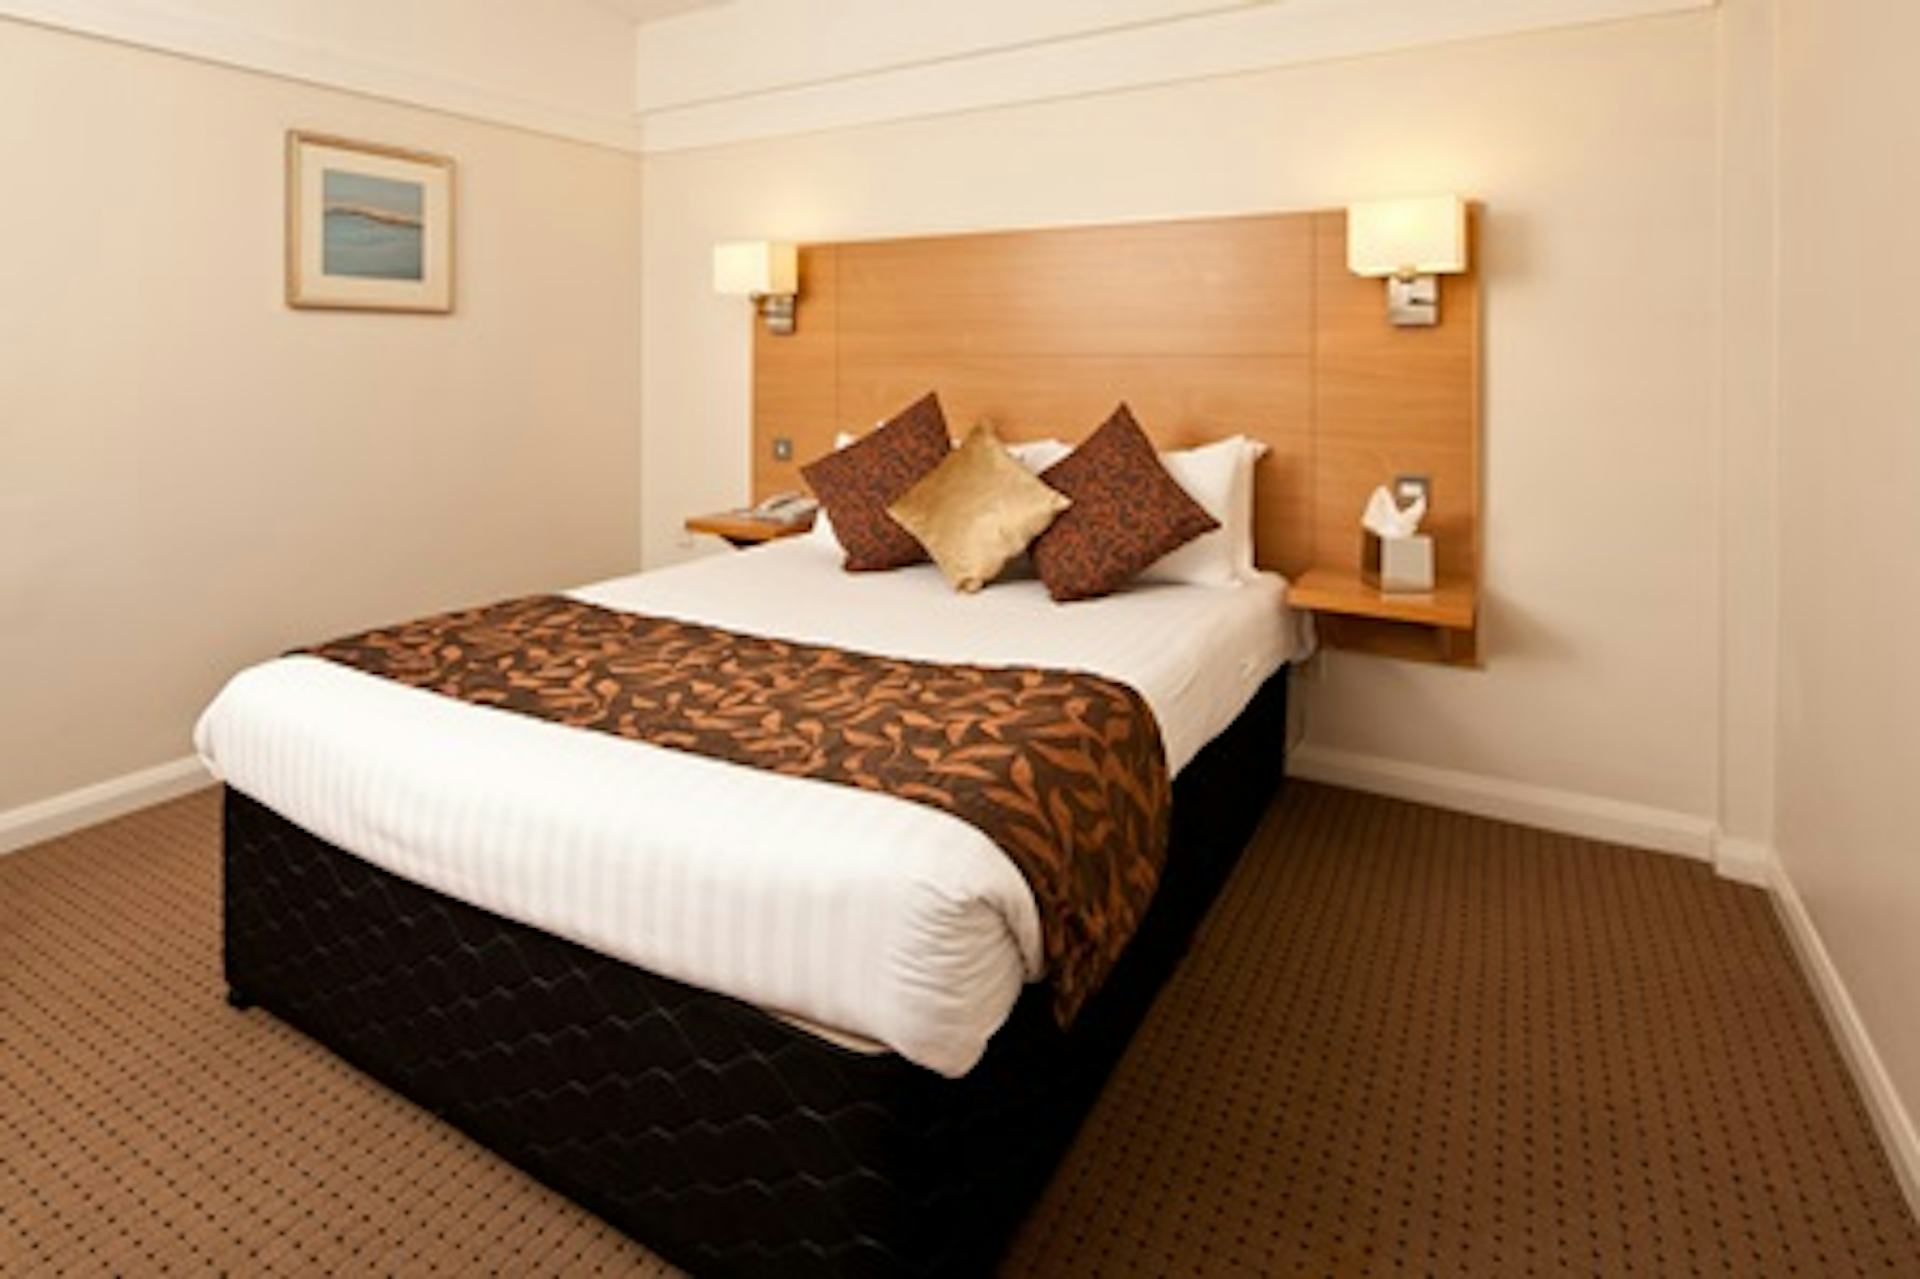 Two Night Break for Two at the Bolton Georgian House Hotel